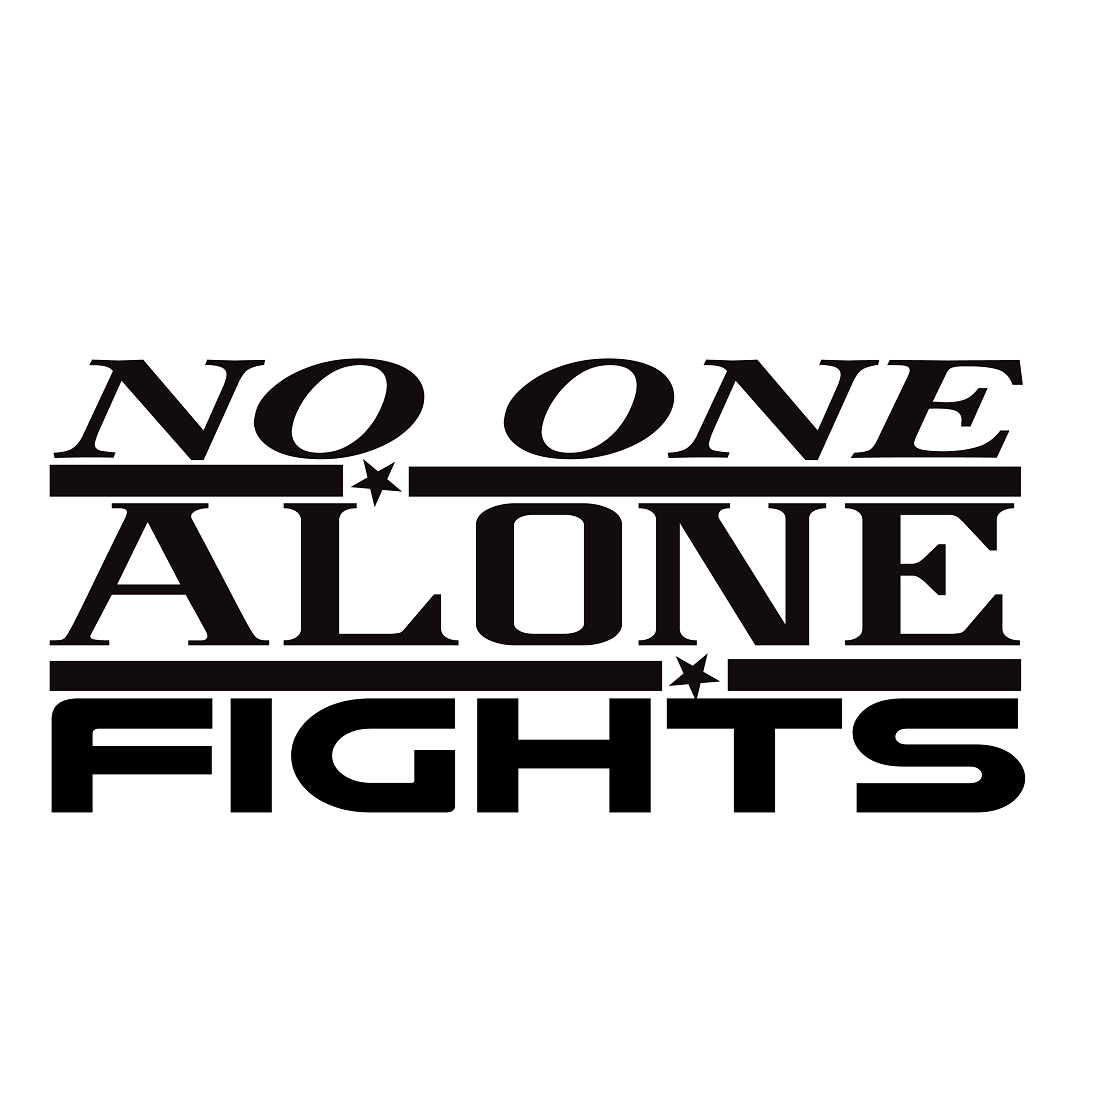 No One Alone Fights preview image.